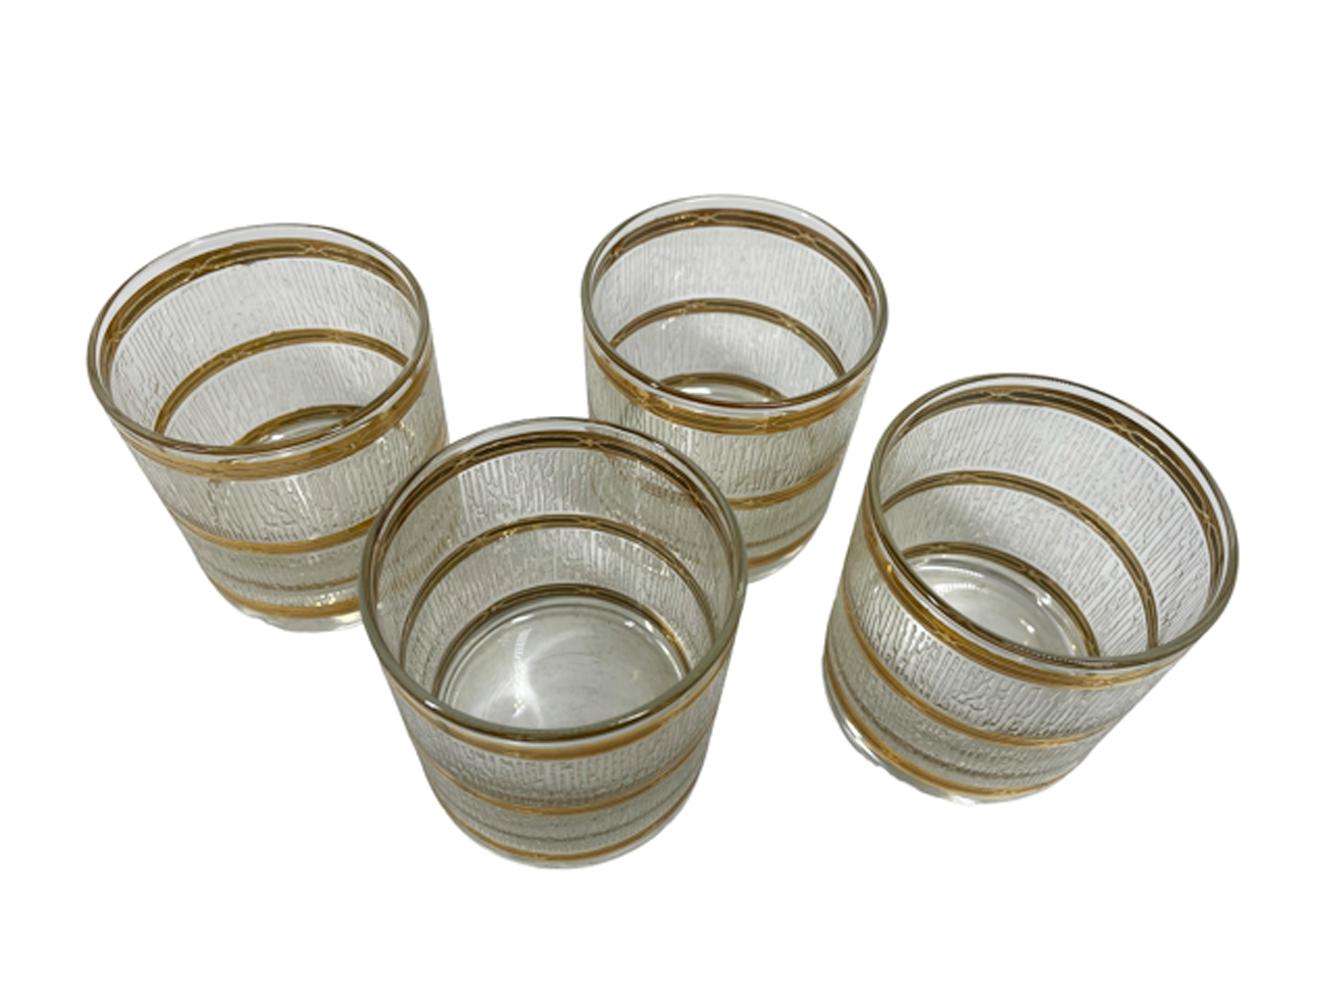 Vintage Culver LTD glasses with wide bands of raised textured bands of vertical lines of translucent white icicles between 22k gold bands with raised designs. These are a hard to find size perfect for drinking spirits 